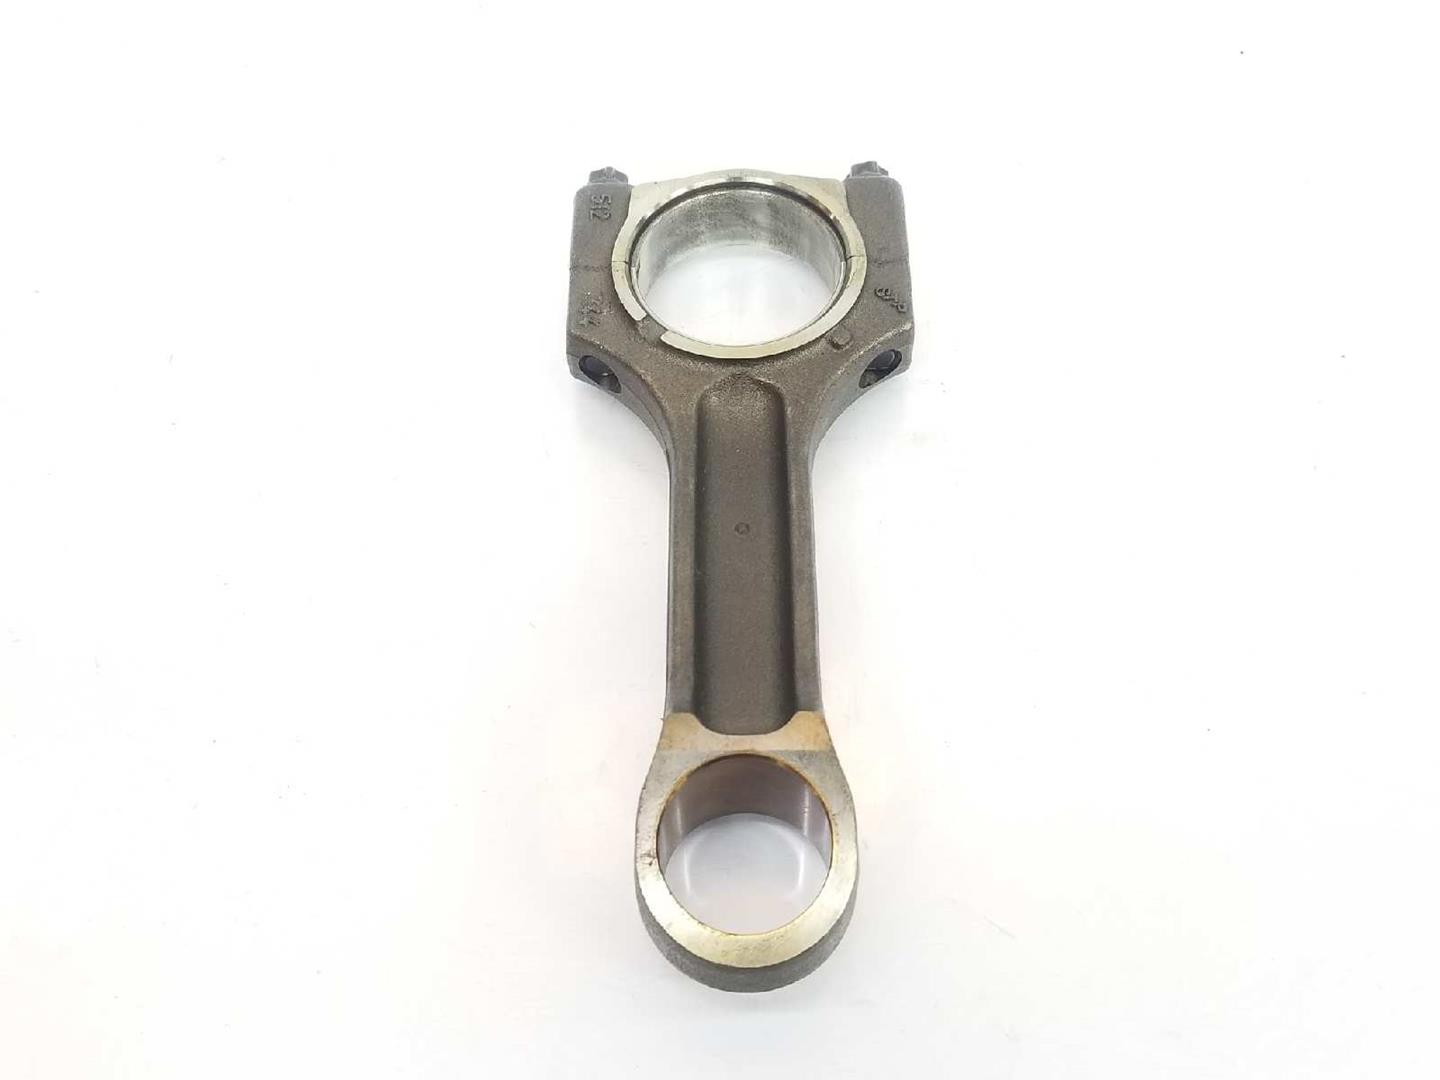 BMW X3 E83 (2003-2010) Connecting Rod 11247798368, 11247798368 19726869